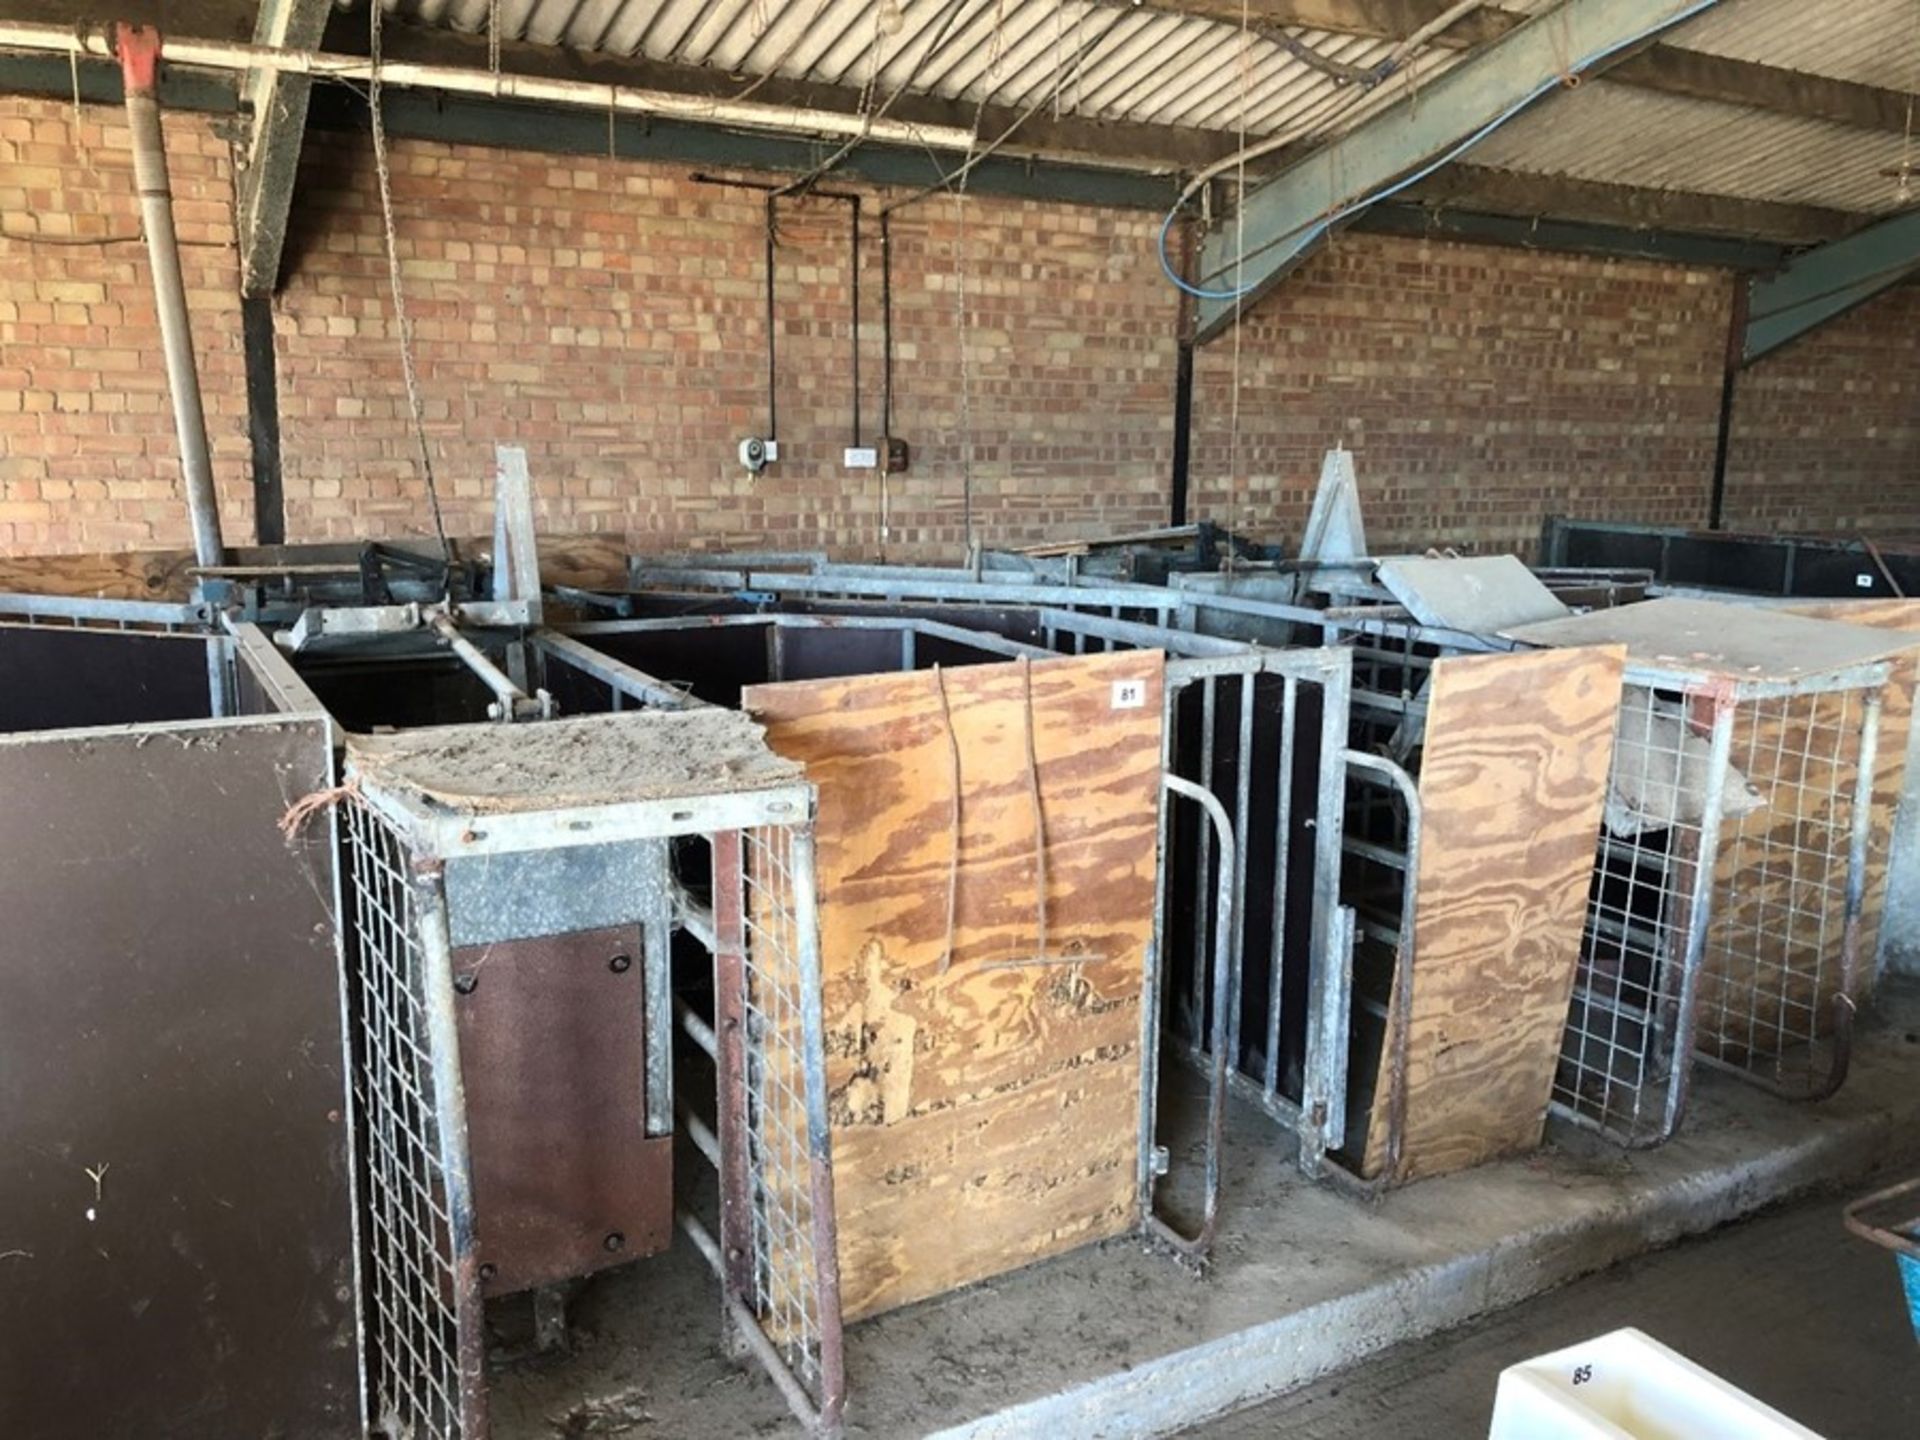 Twin bay Quality Equipment galvanised automatic sow feeders (sold in situ, buyer to dismantle)